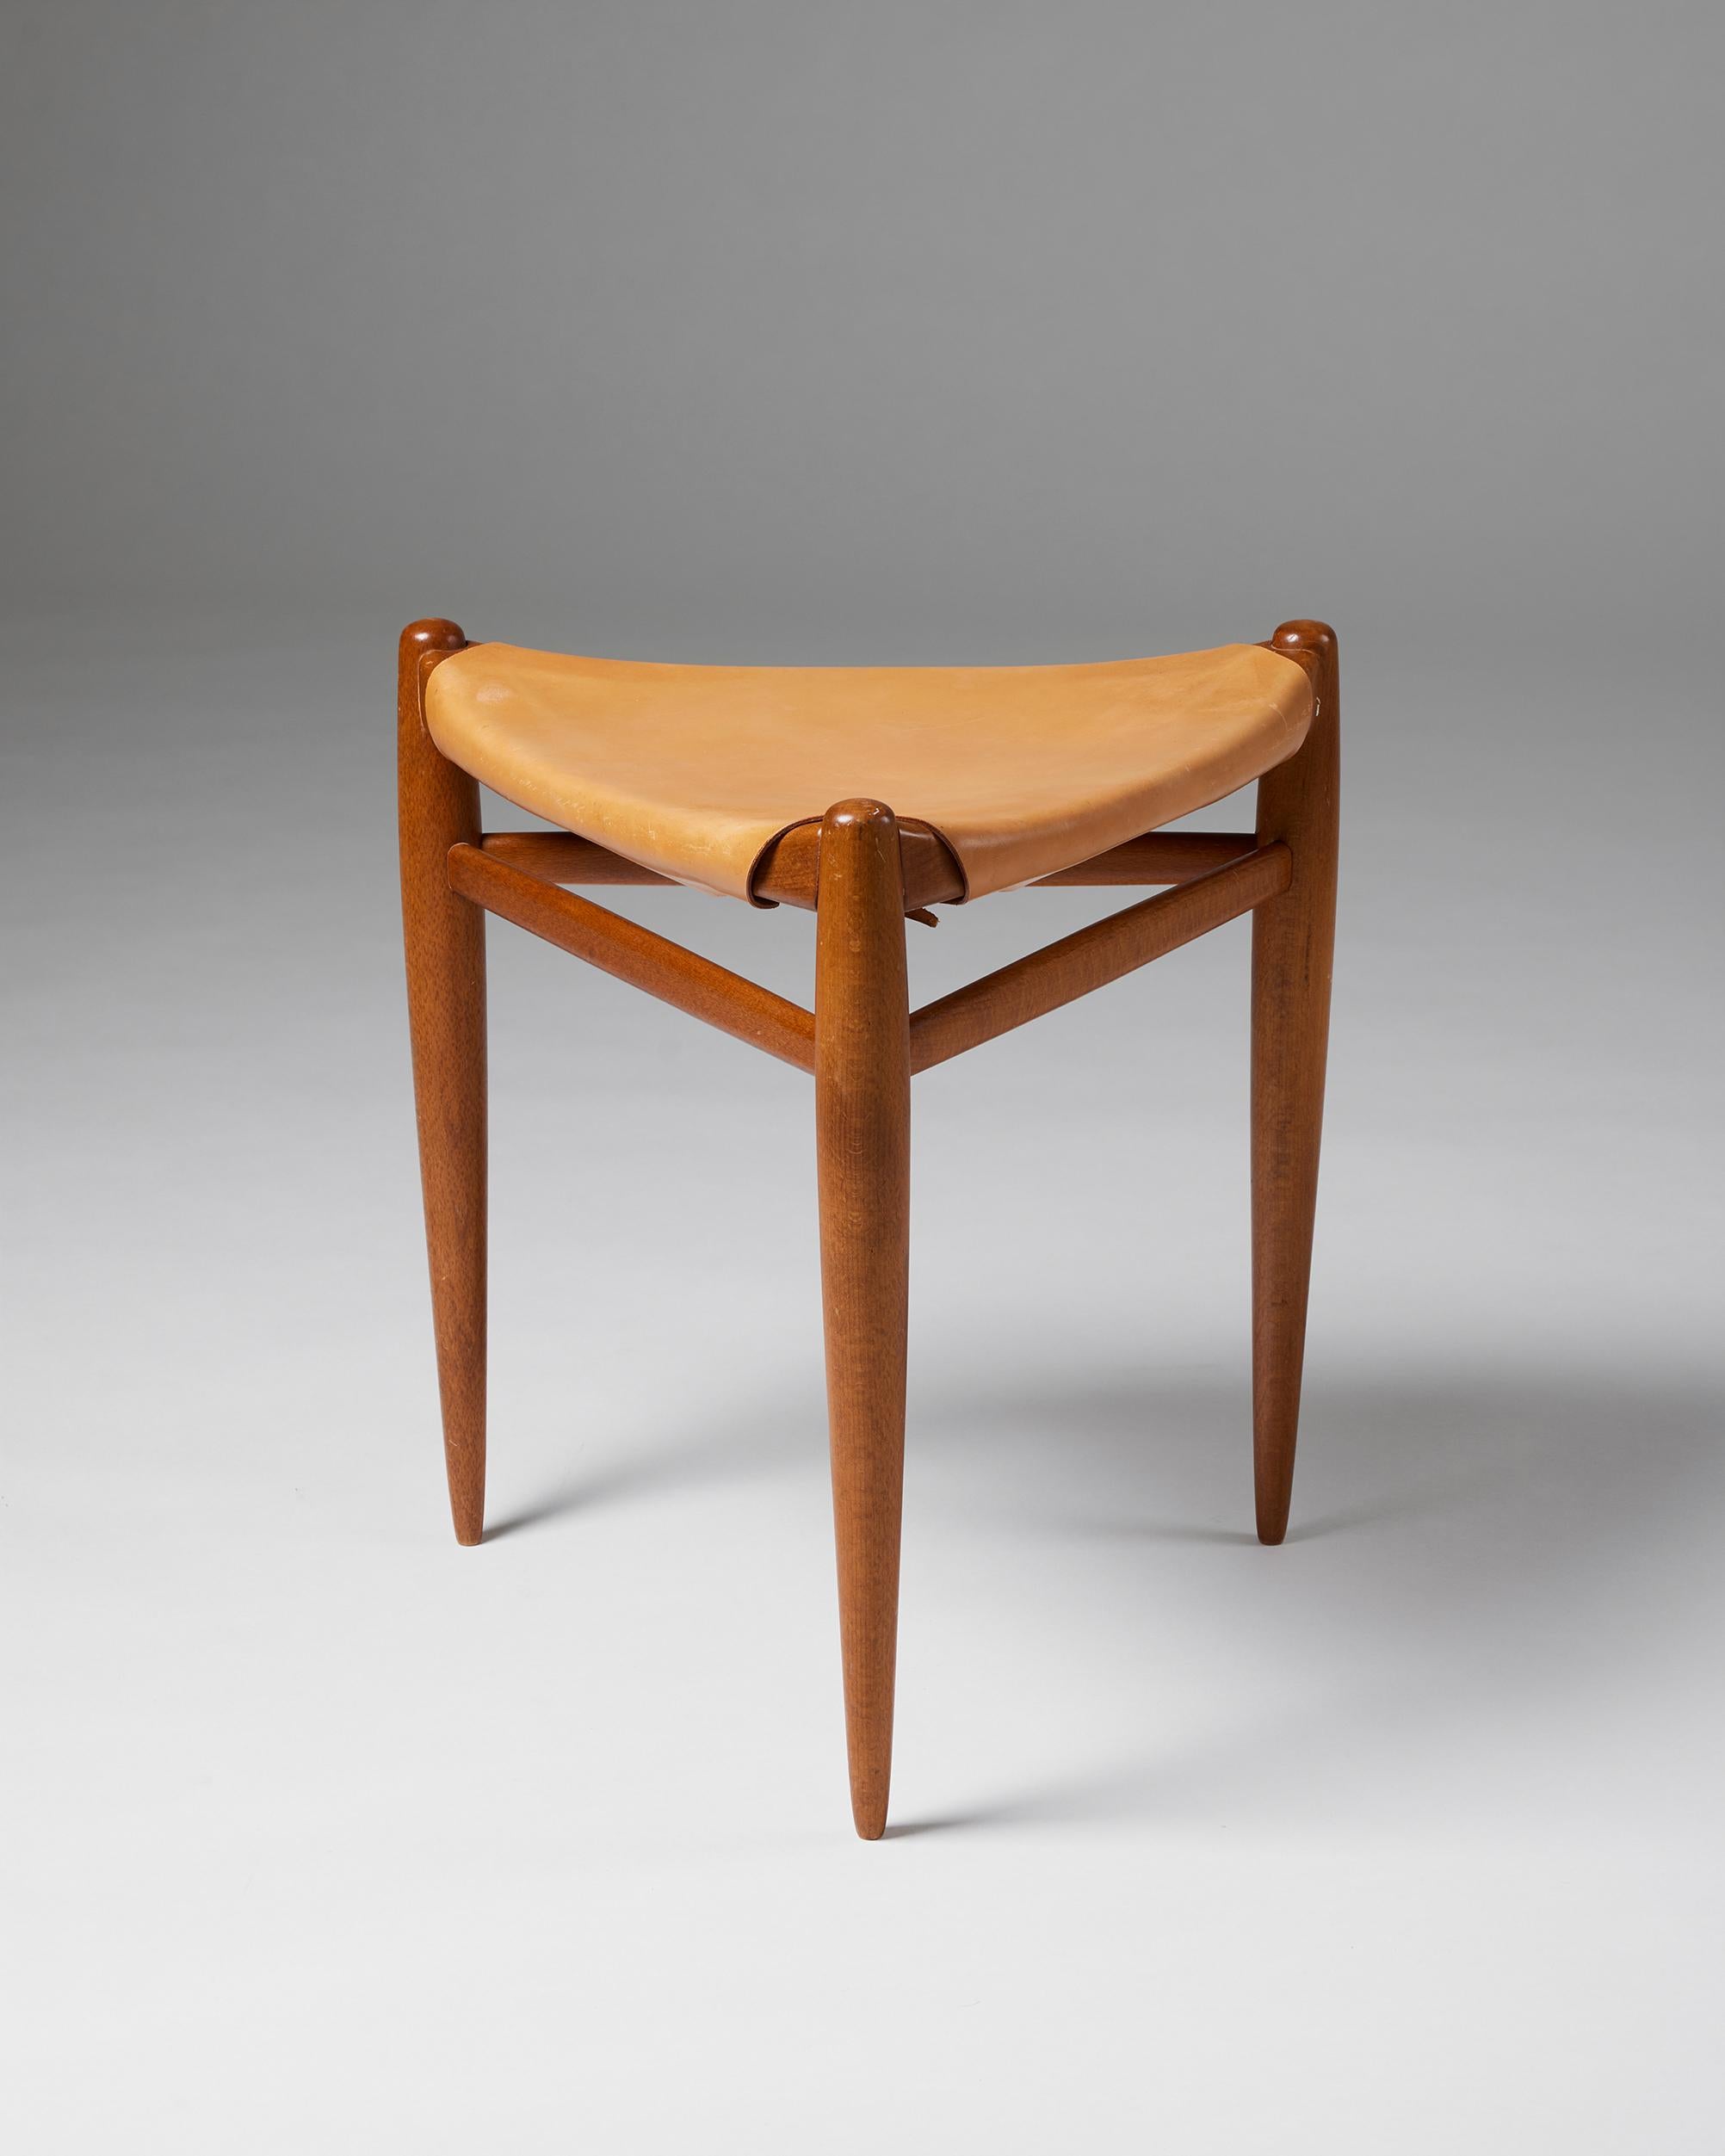 Stool designed by Uno and Östen Kristiansson for Vittsö,
Sweden, 1960s.

Teak and leather.

H: 40 cm 
W: 42 cm 
D: 42 cm.